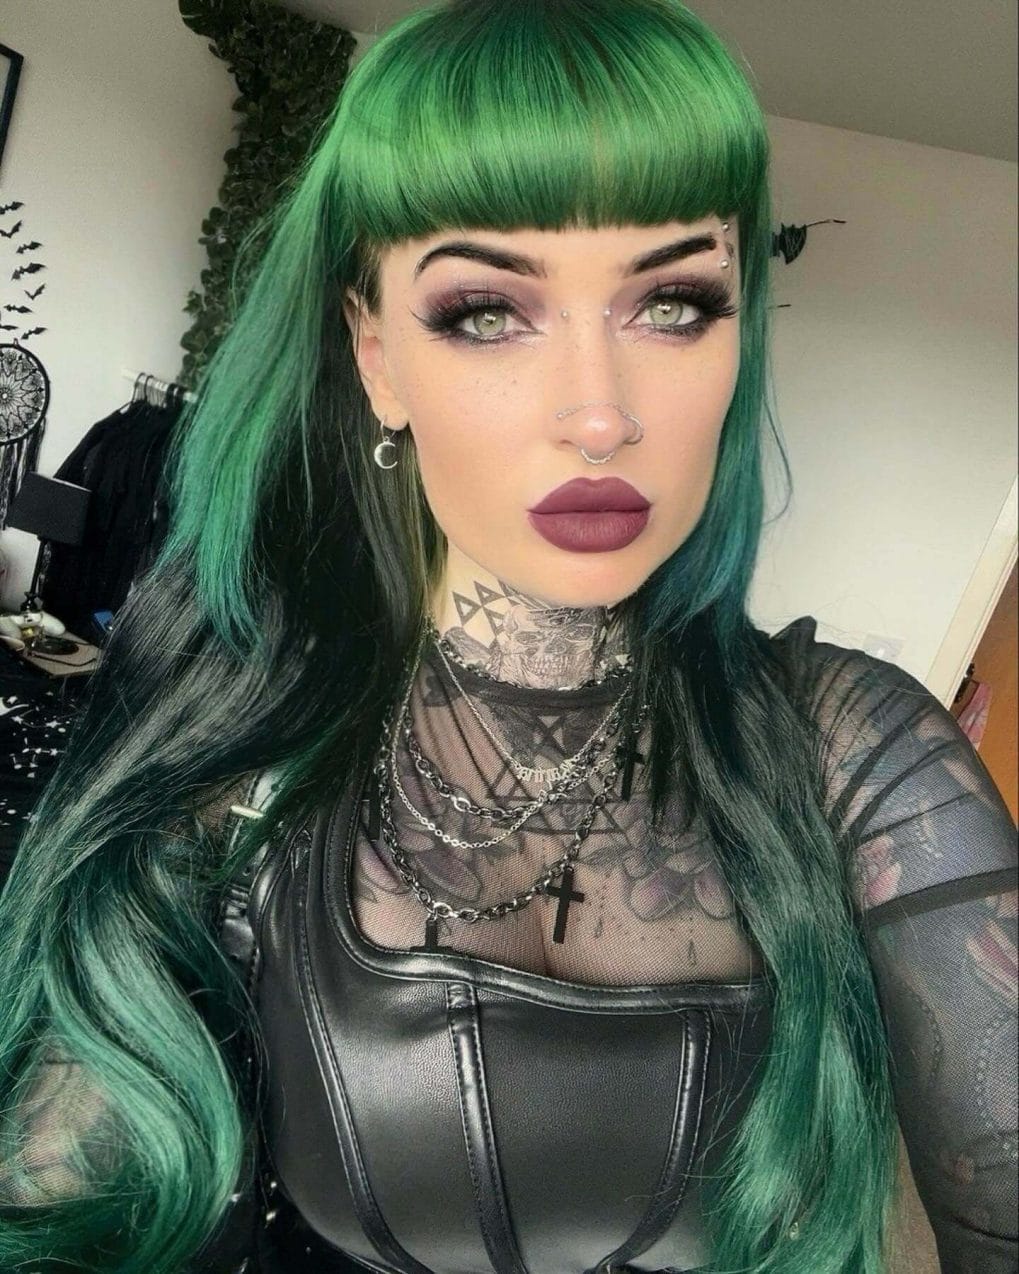 Electric green wavy hair with full bangs and eyebrow accents